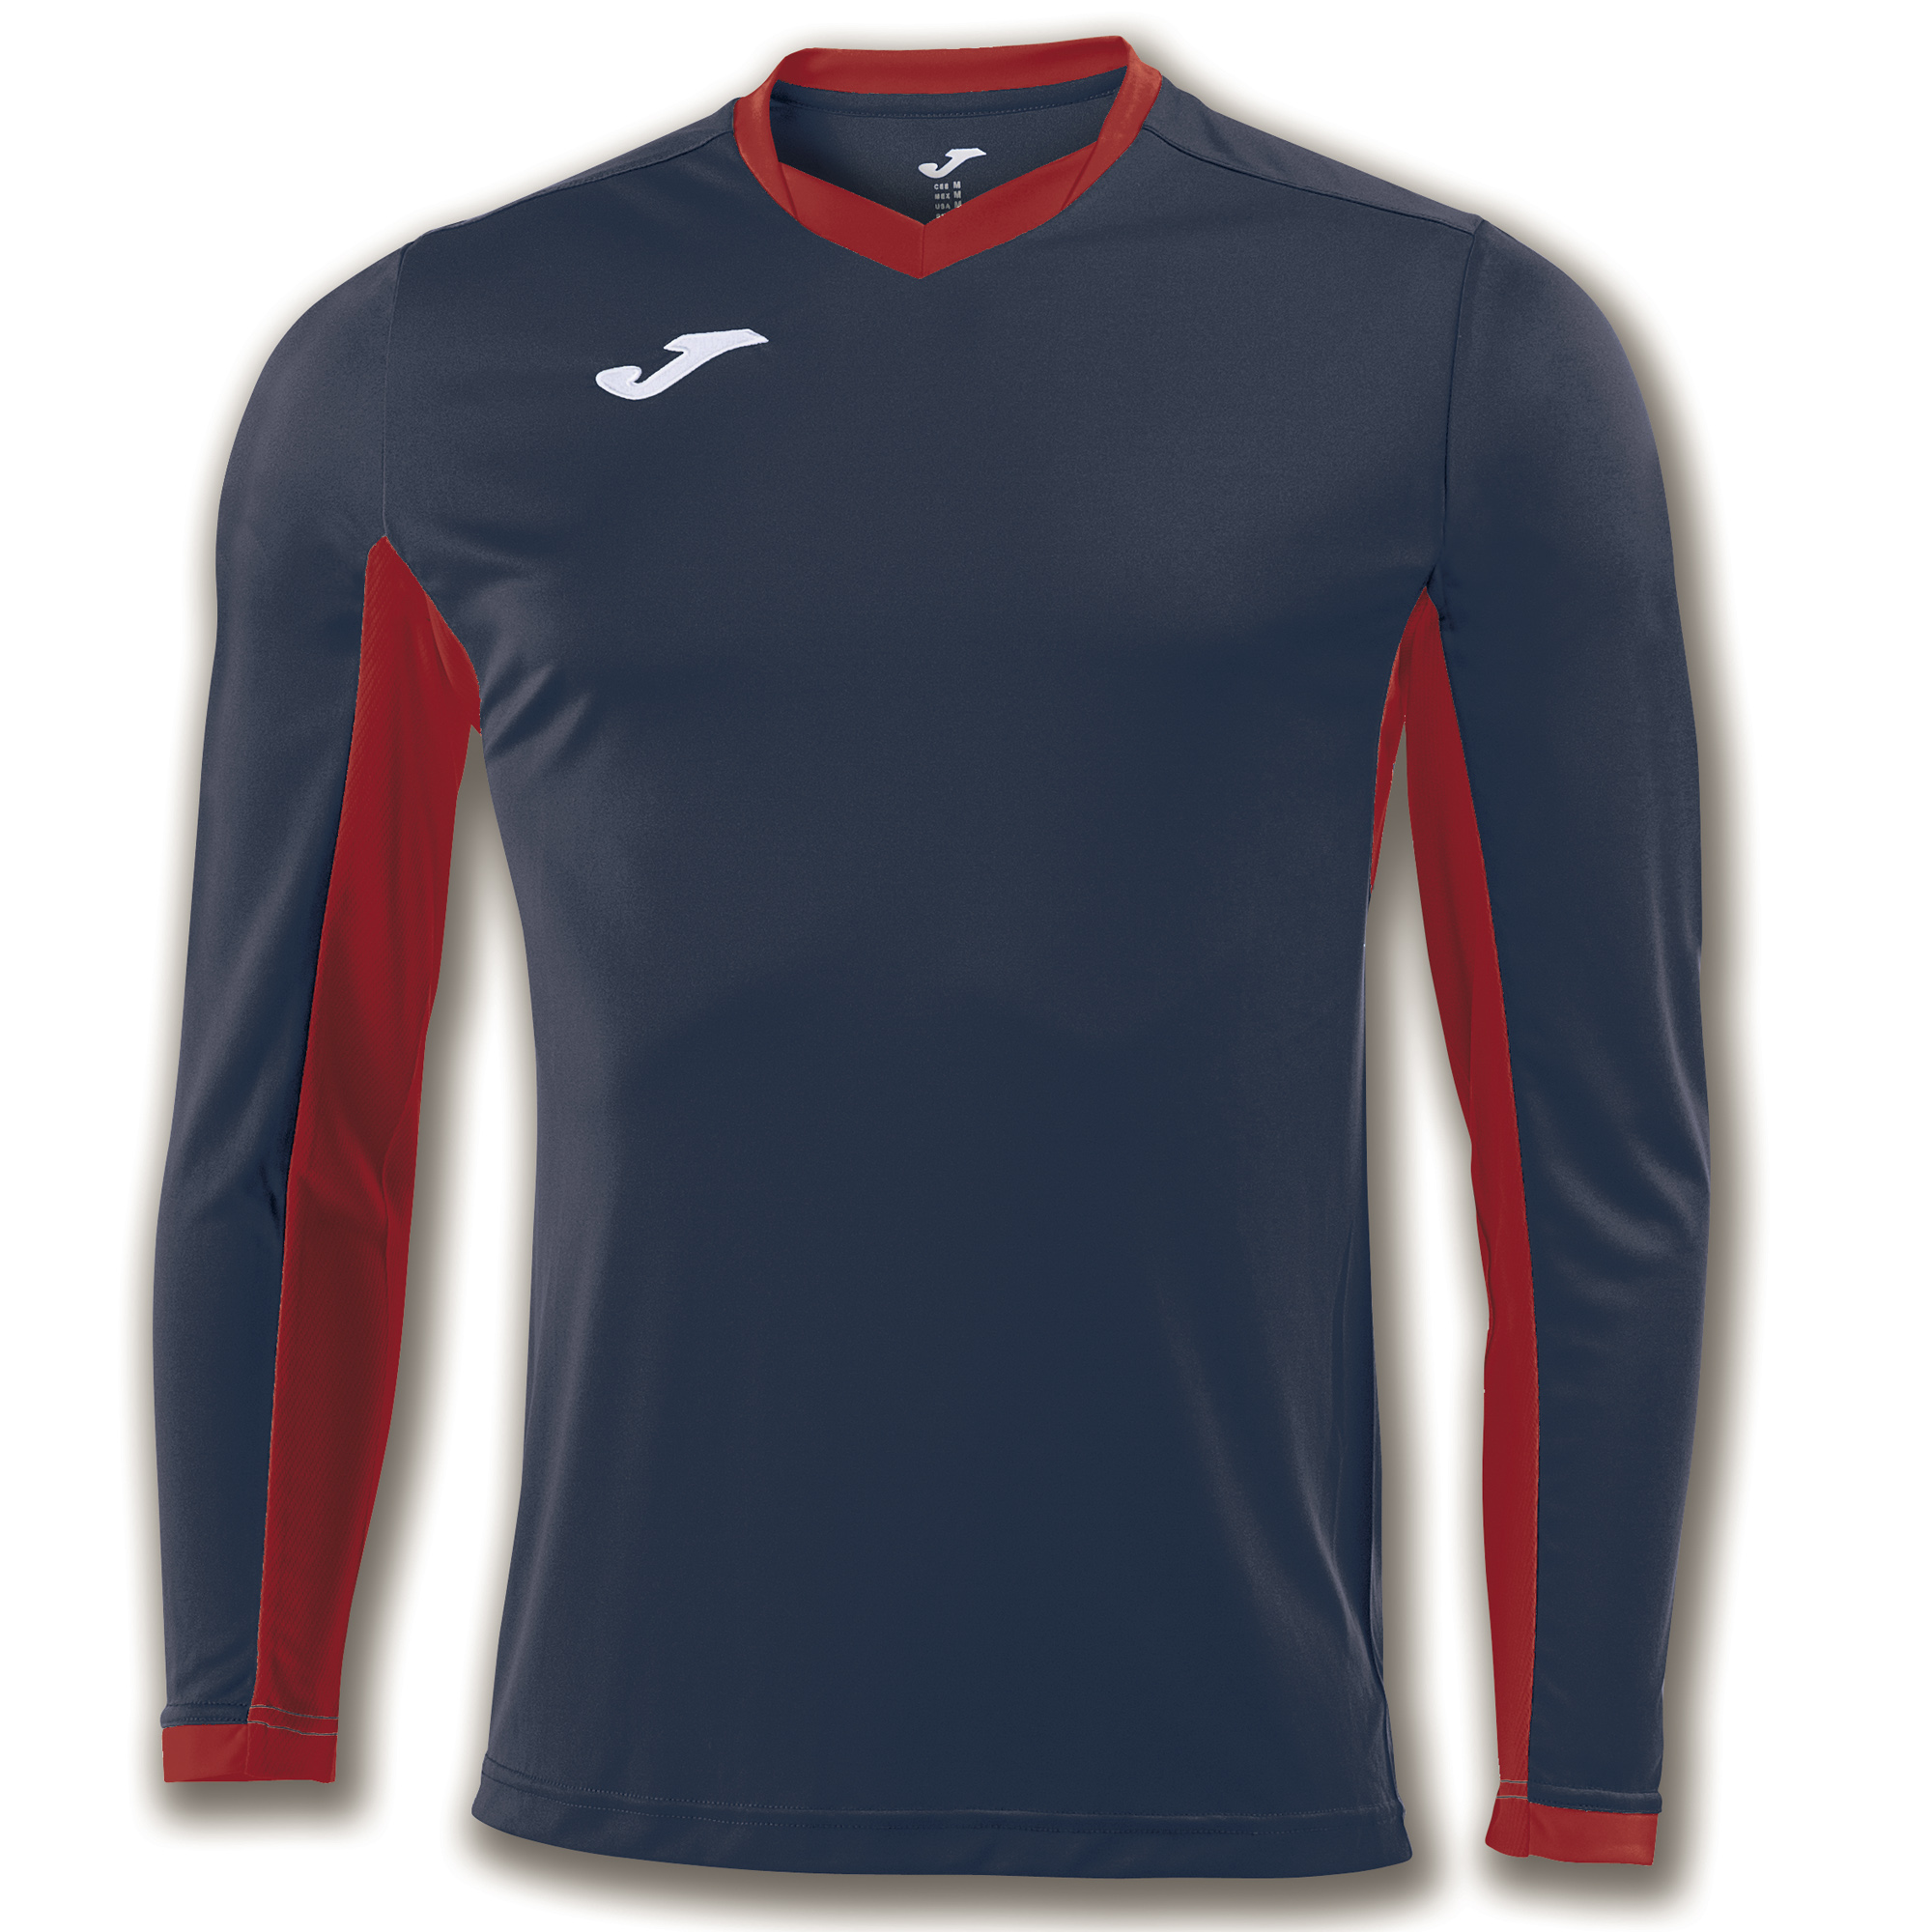 navy blue and red t shirt